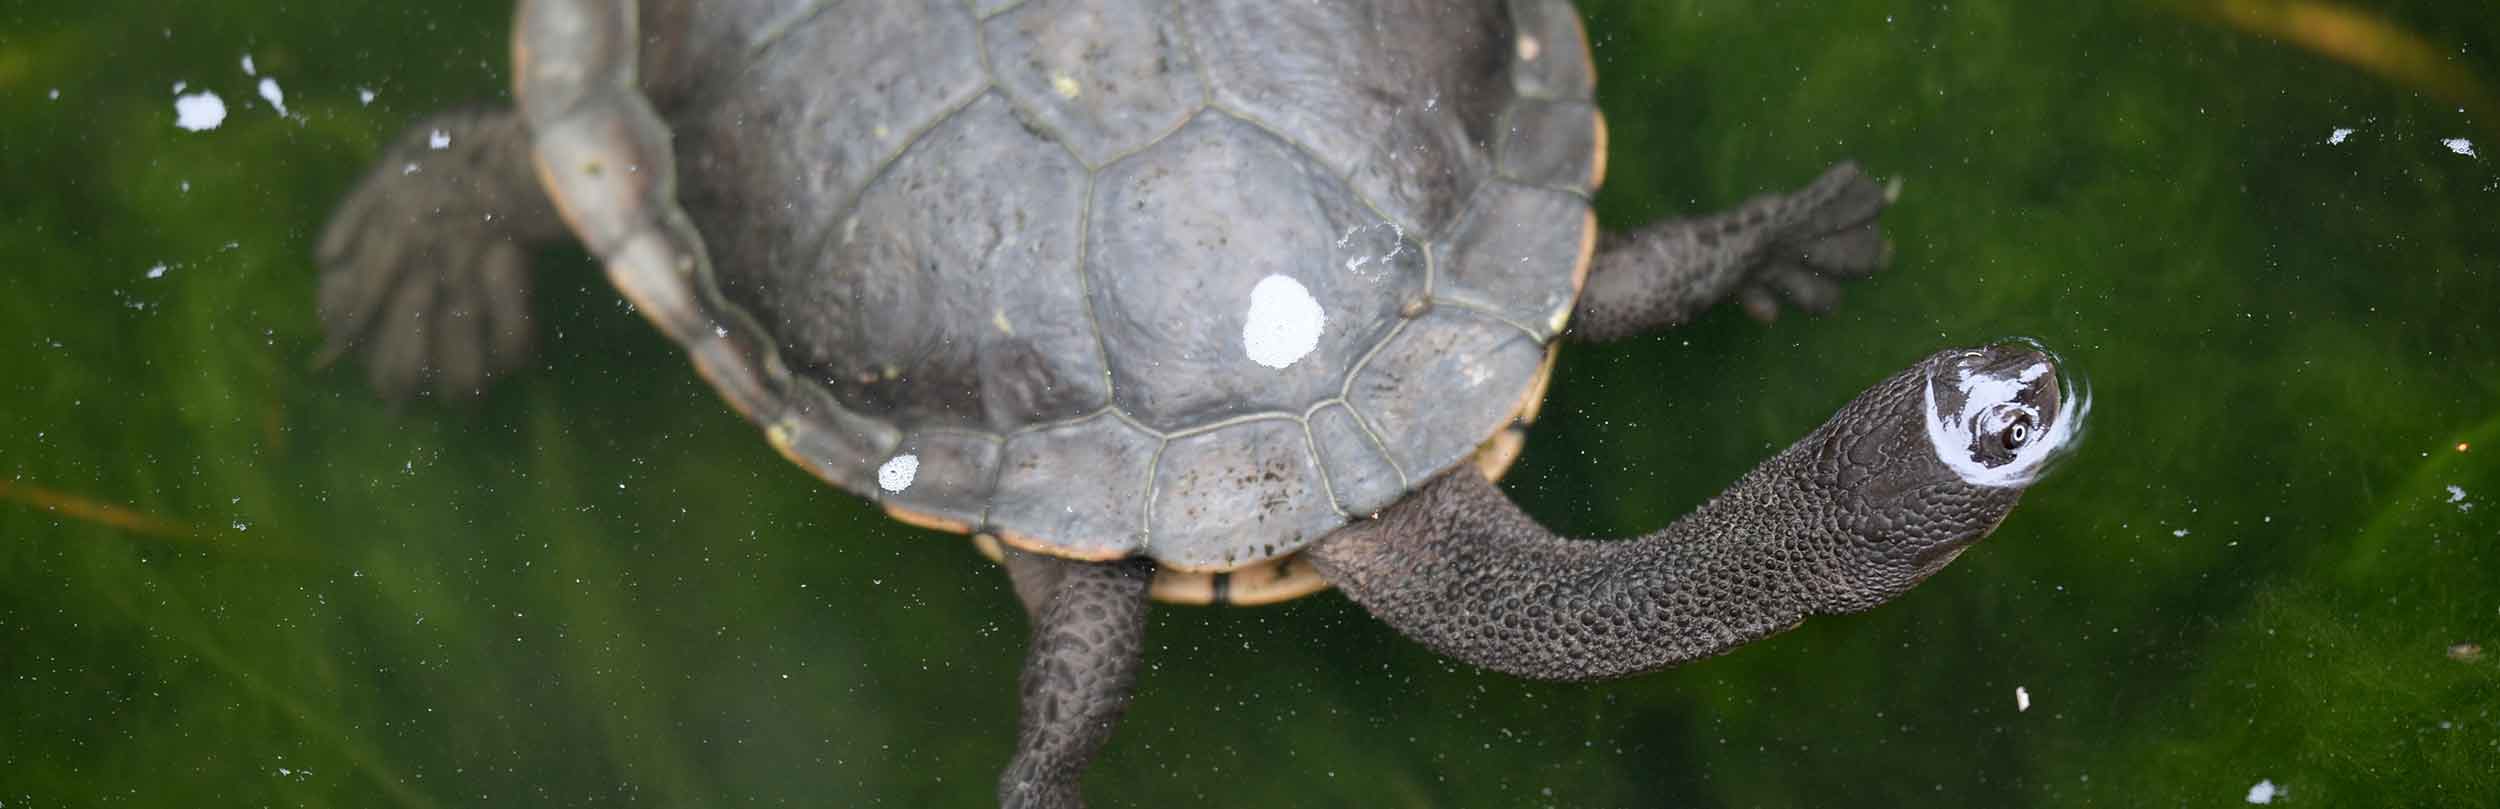 Keeping A Pet Turtle: A Complete Guide To Raising Turtles In Australia